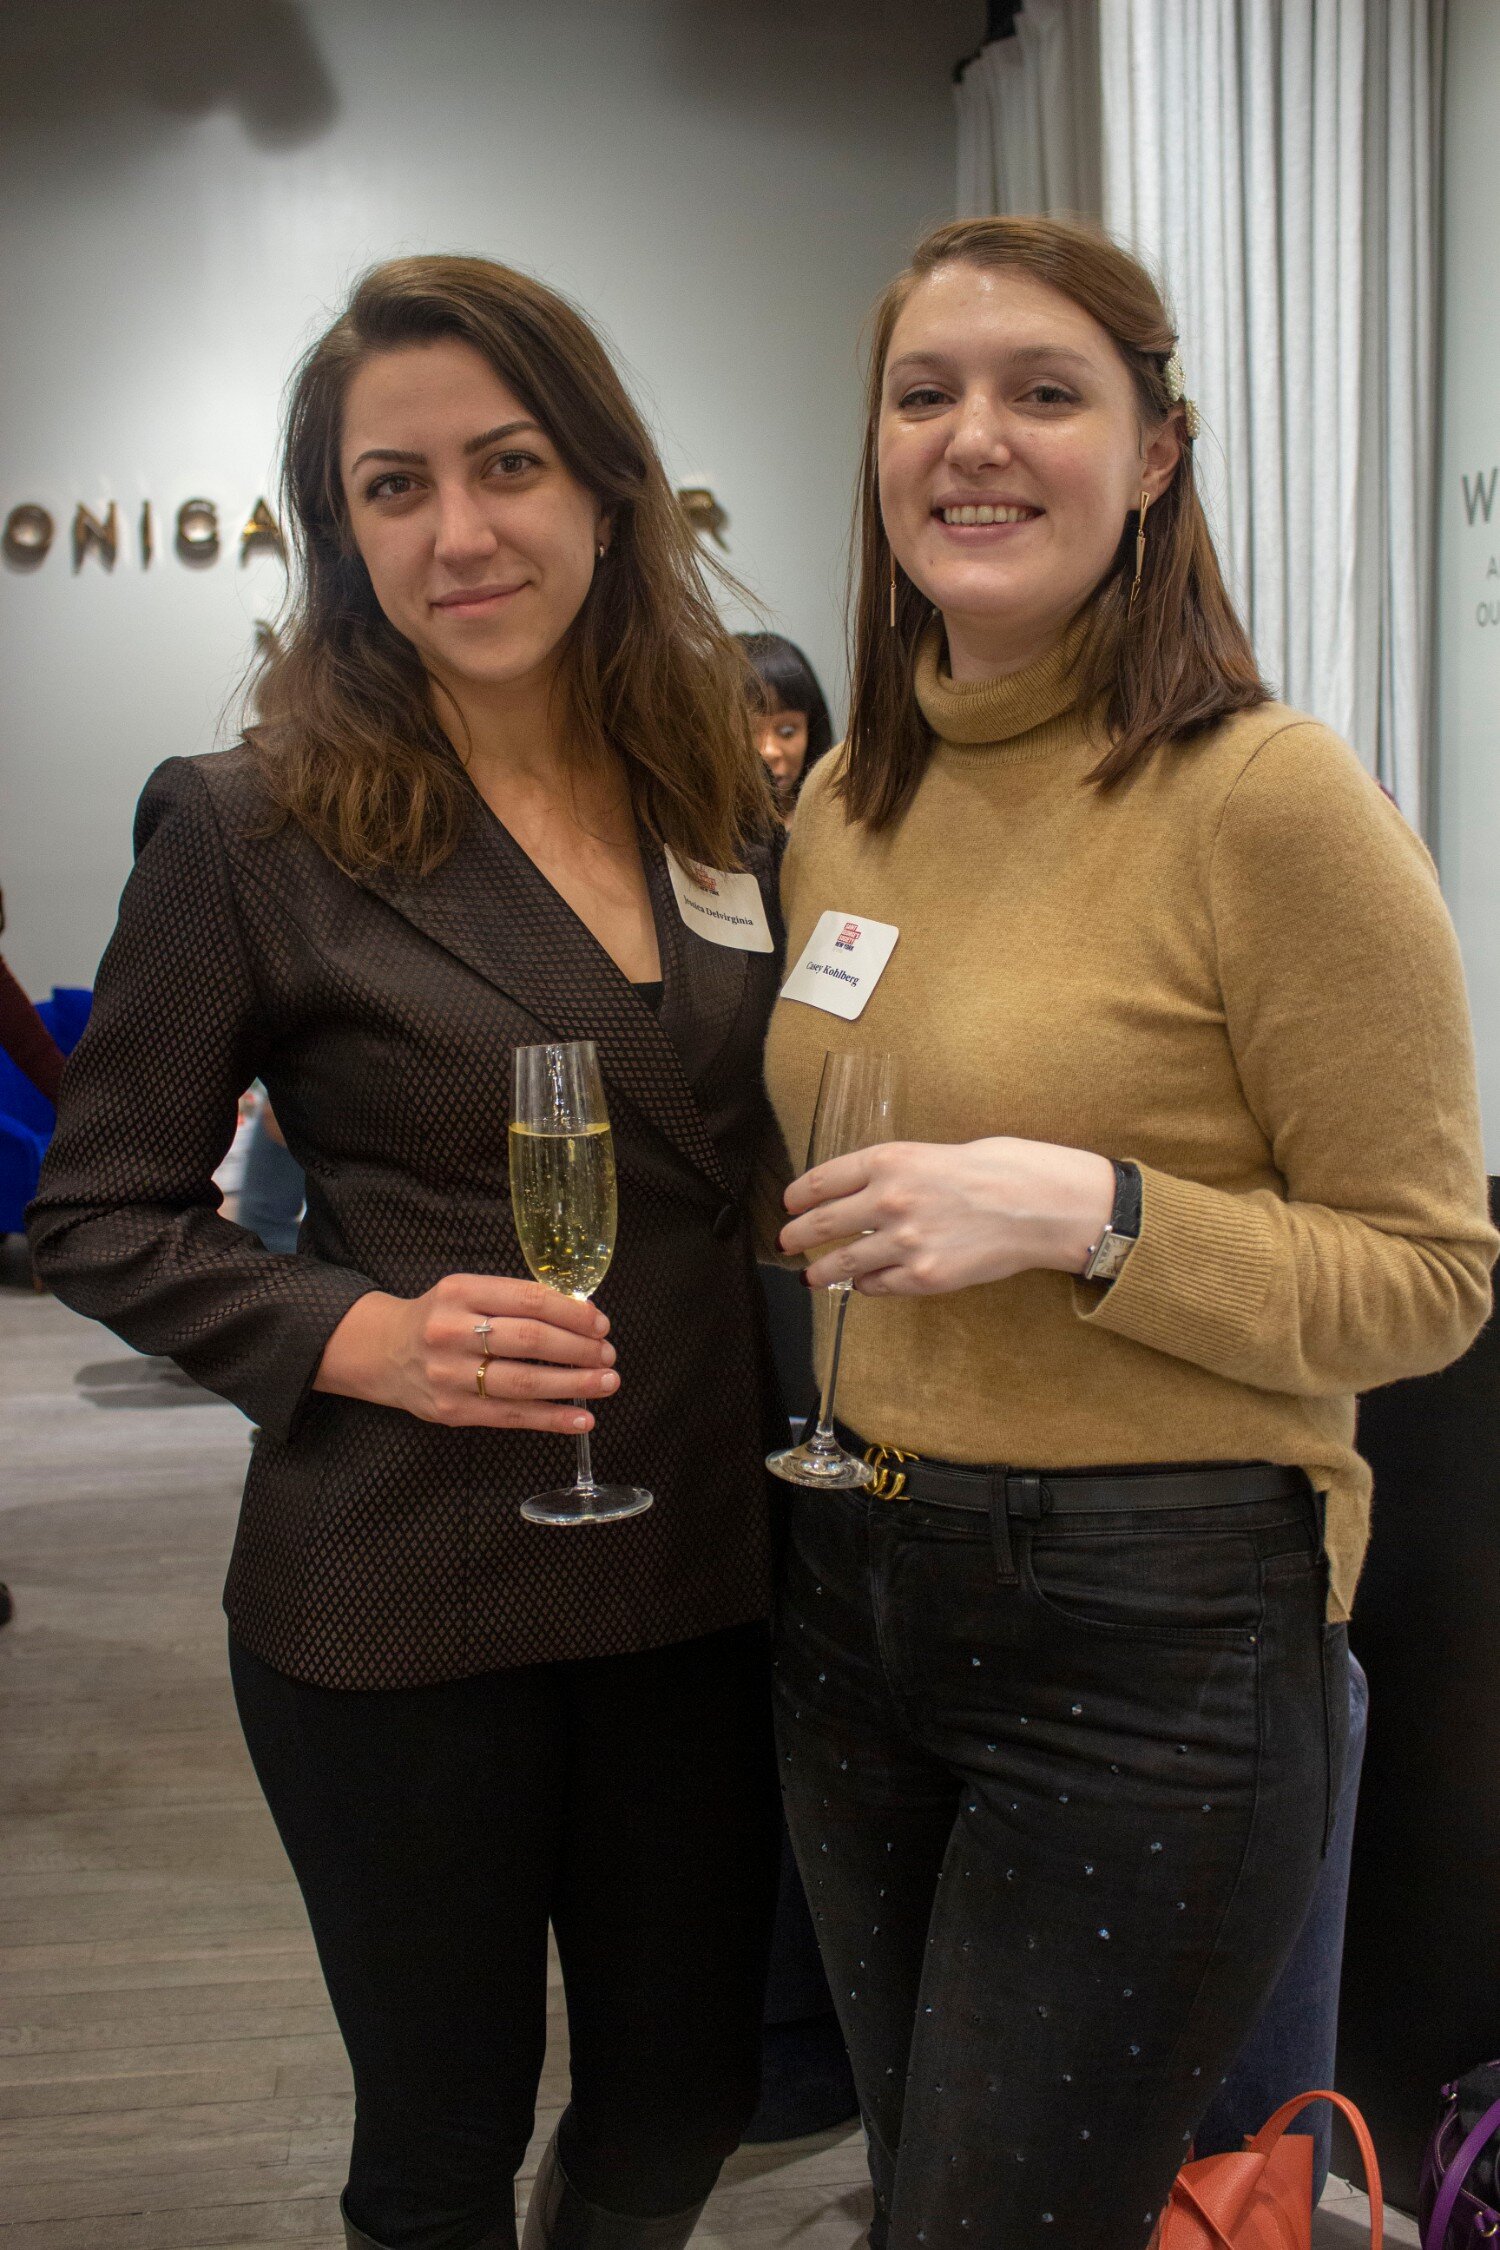  Jess DelVirginia &amp; Casey Kohlberg at private shopping event in partnership with Monica Vinader 